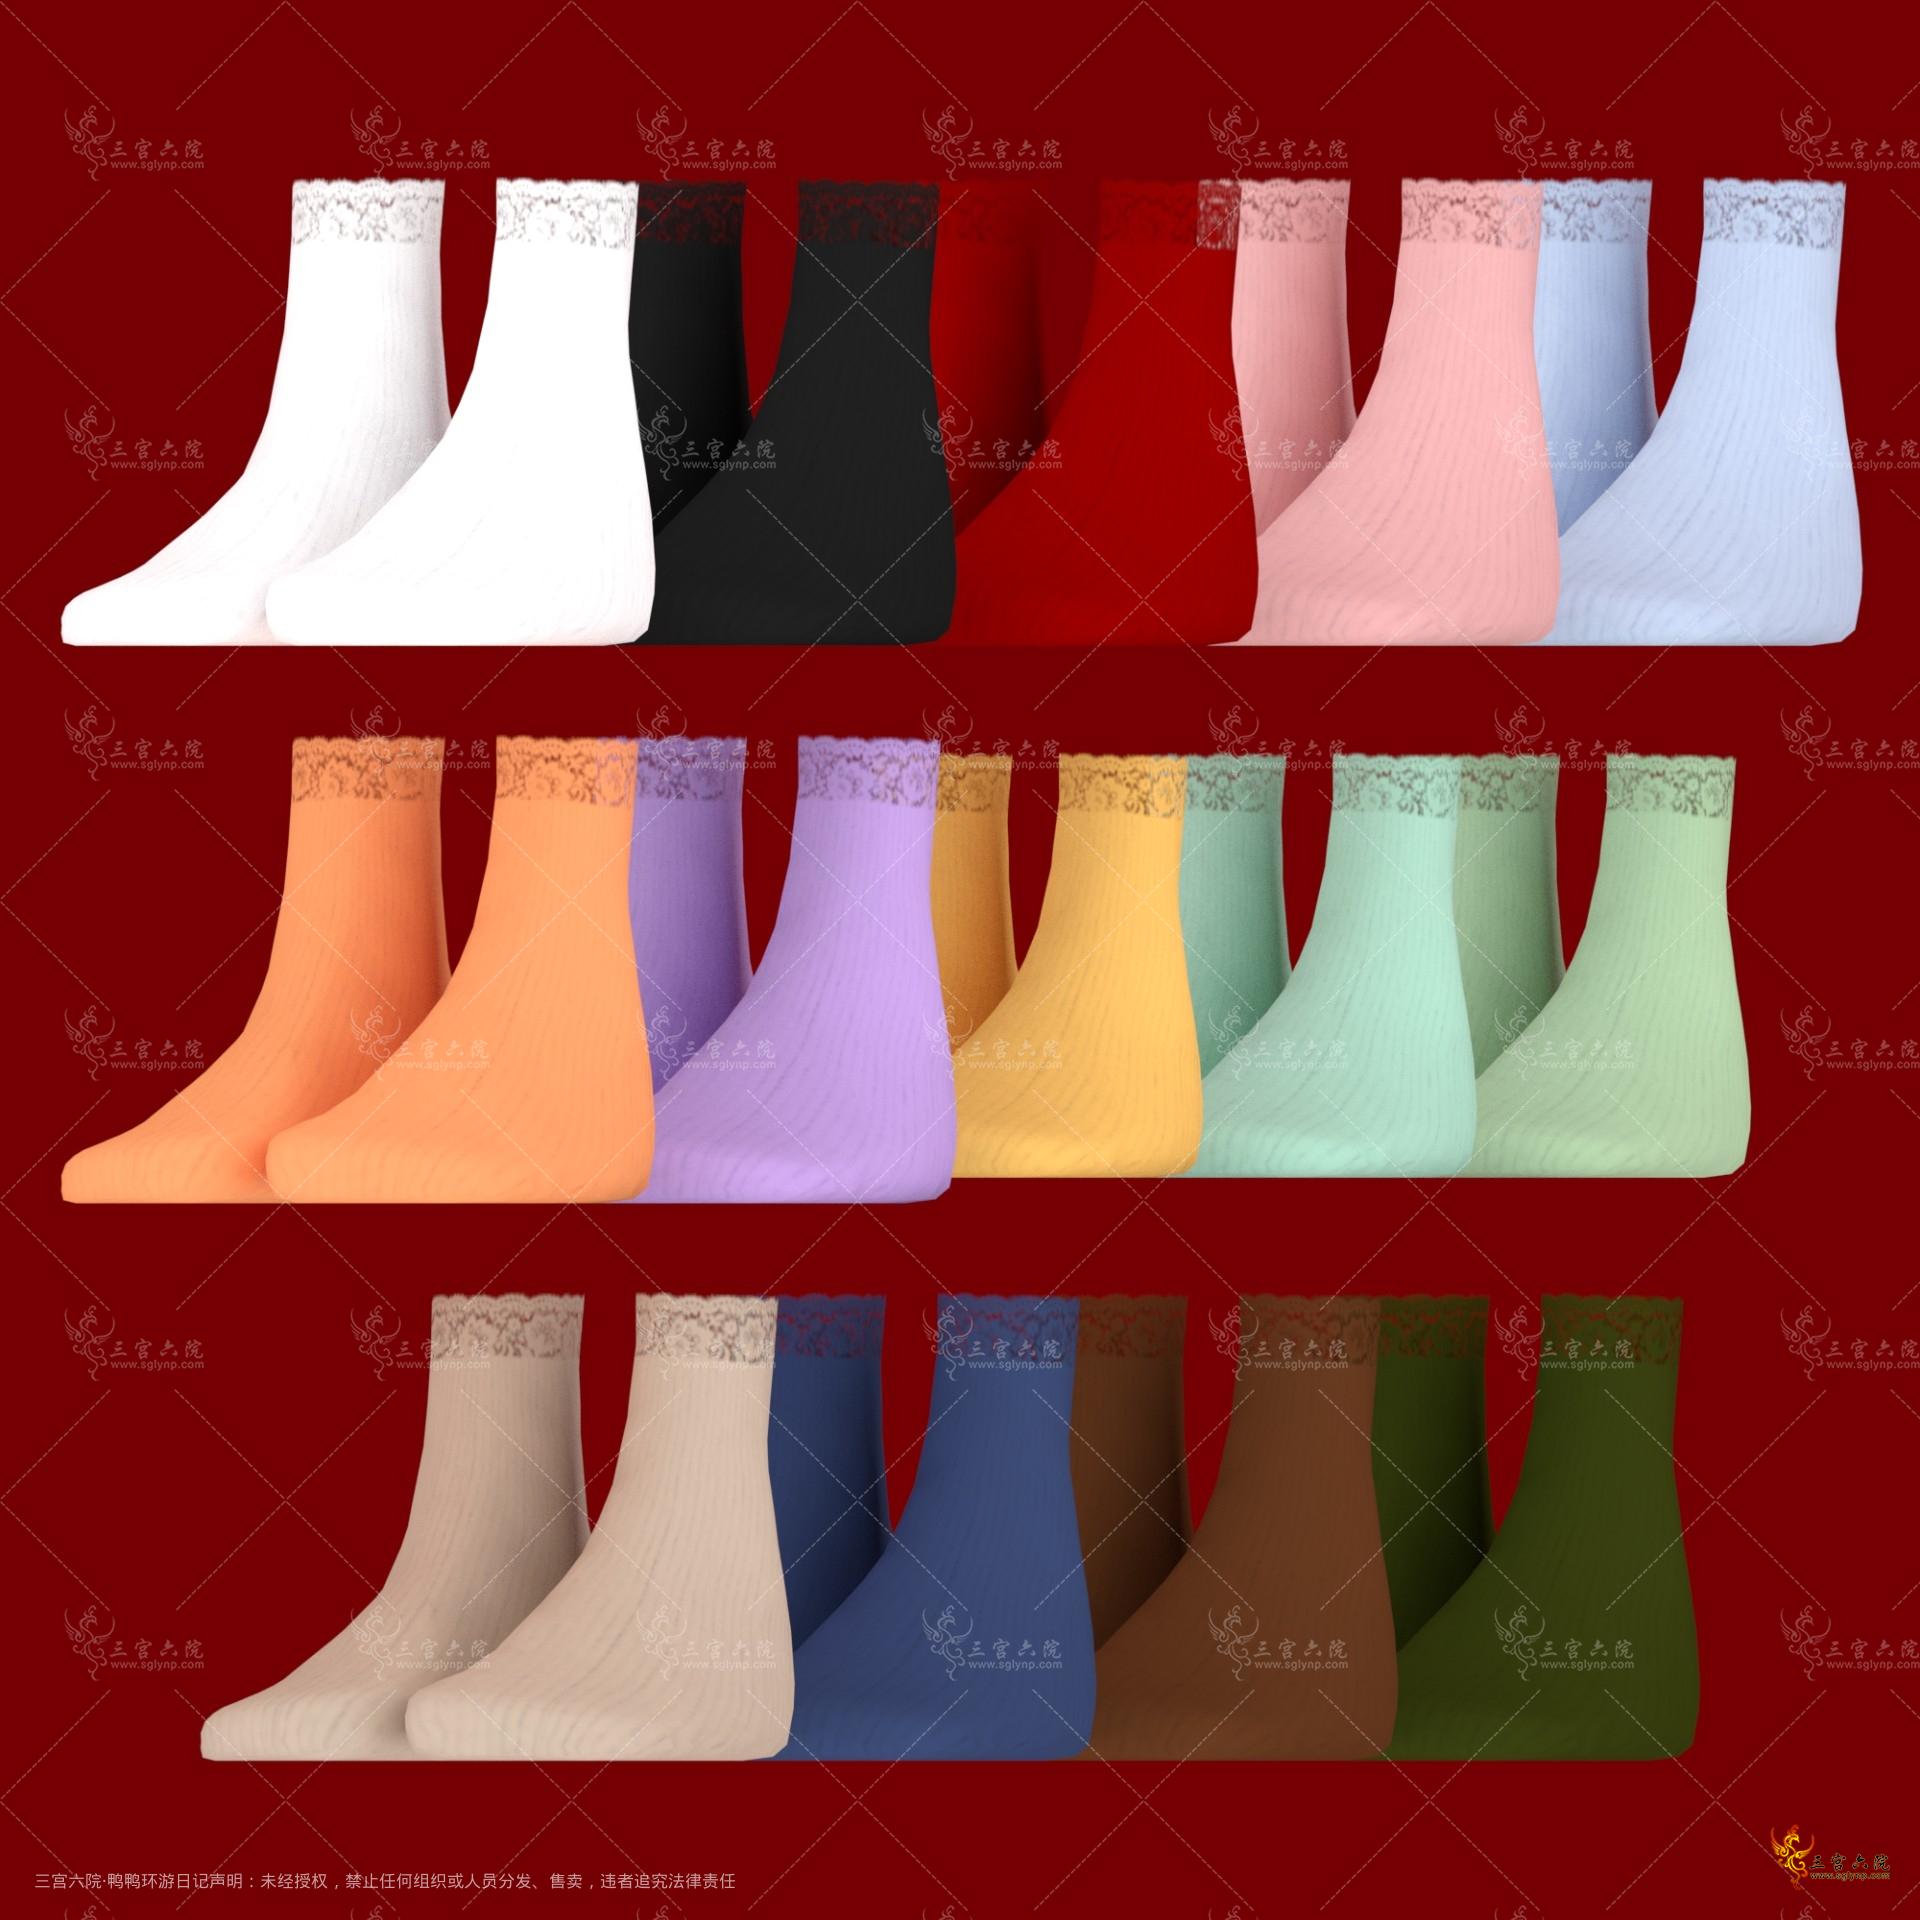 laceknitsocks_swatches.png